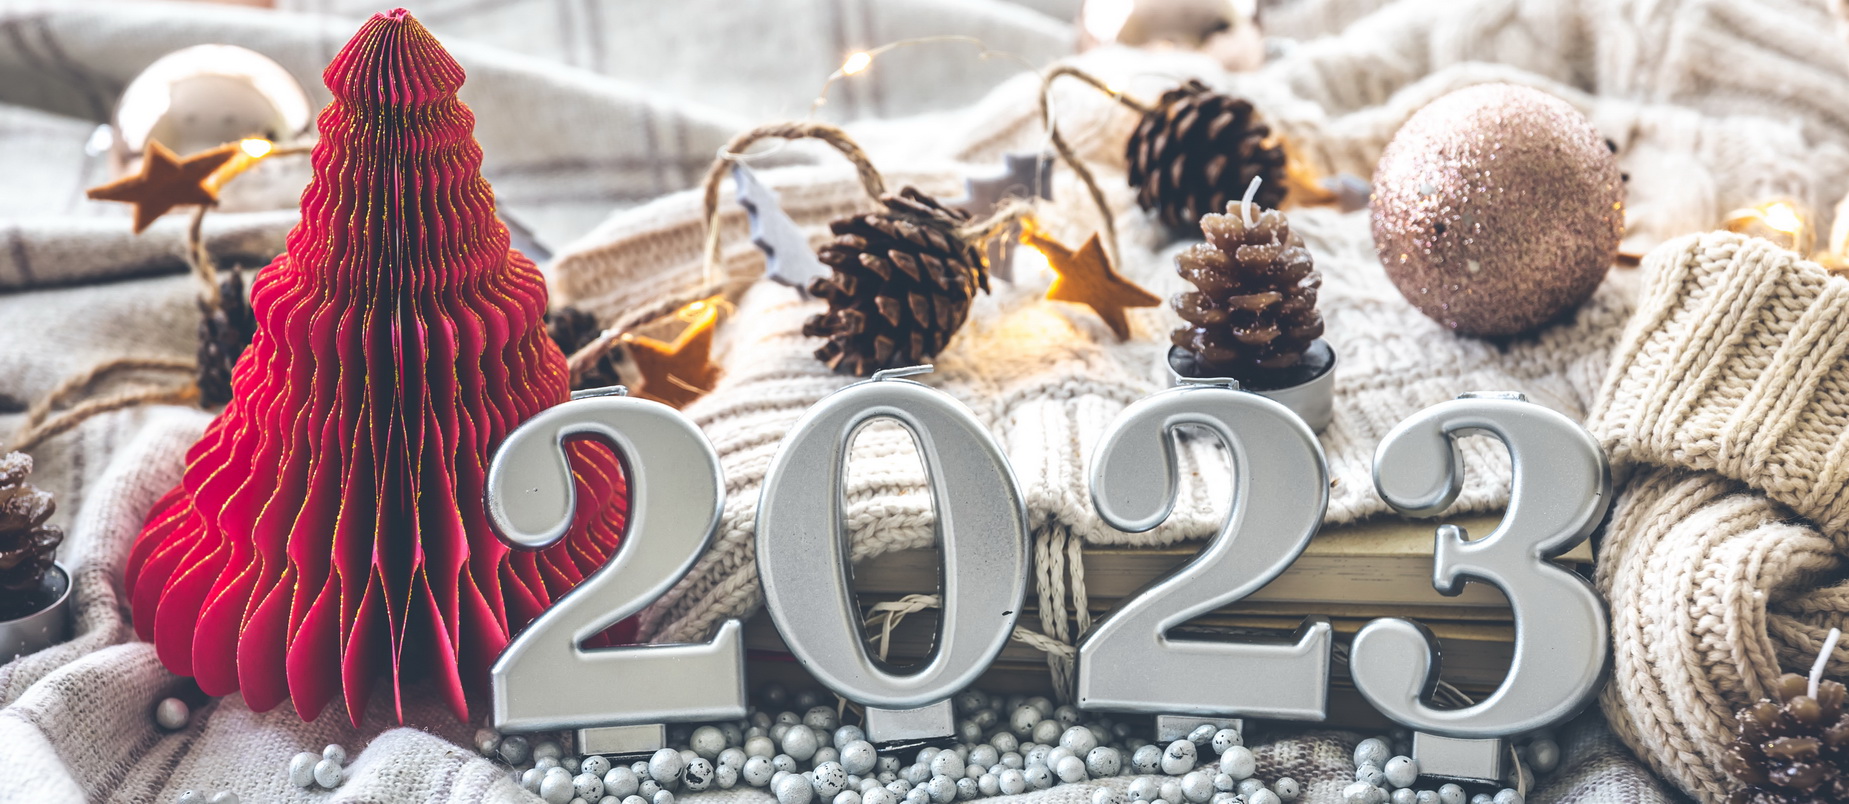 christmas-cozy-background-with-numbers-2023-and-decor-details